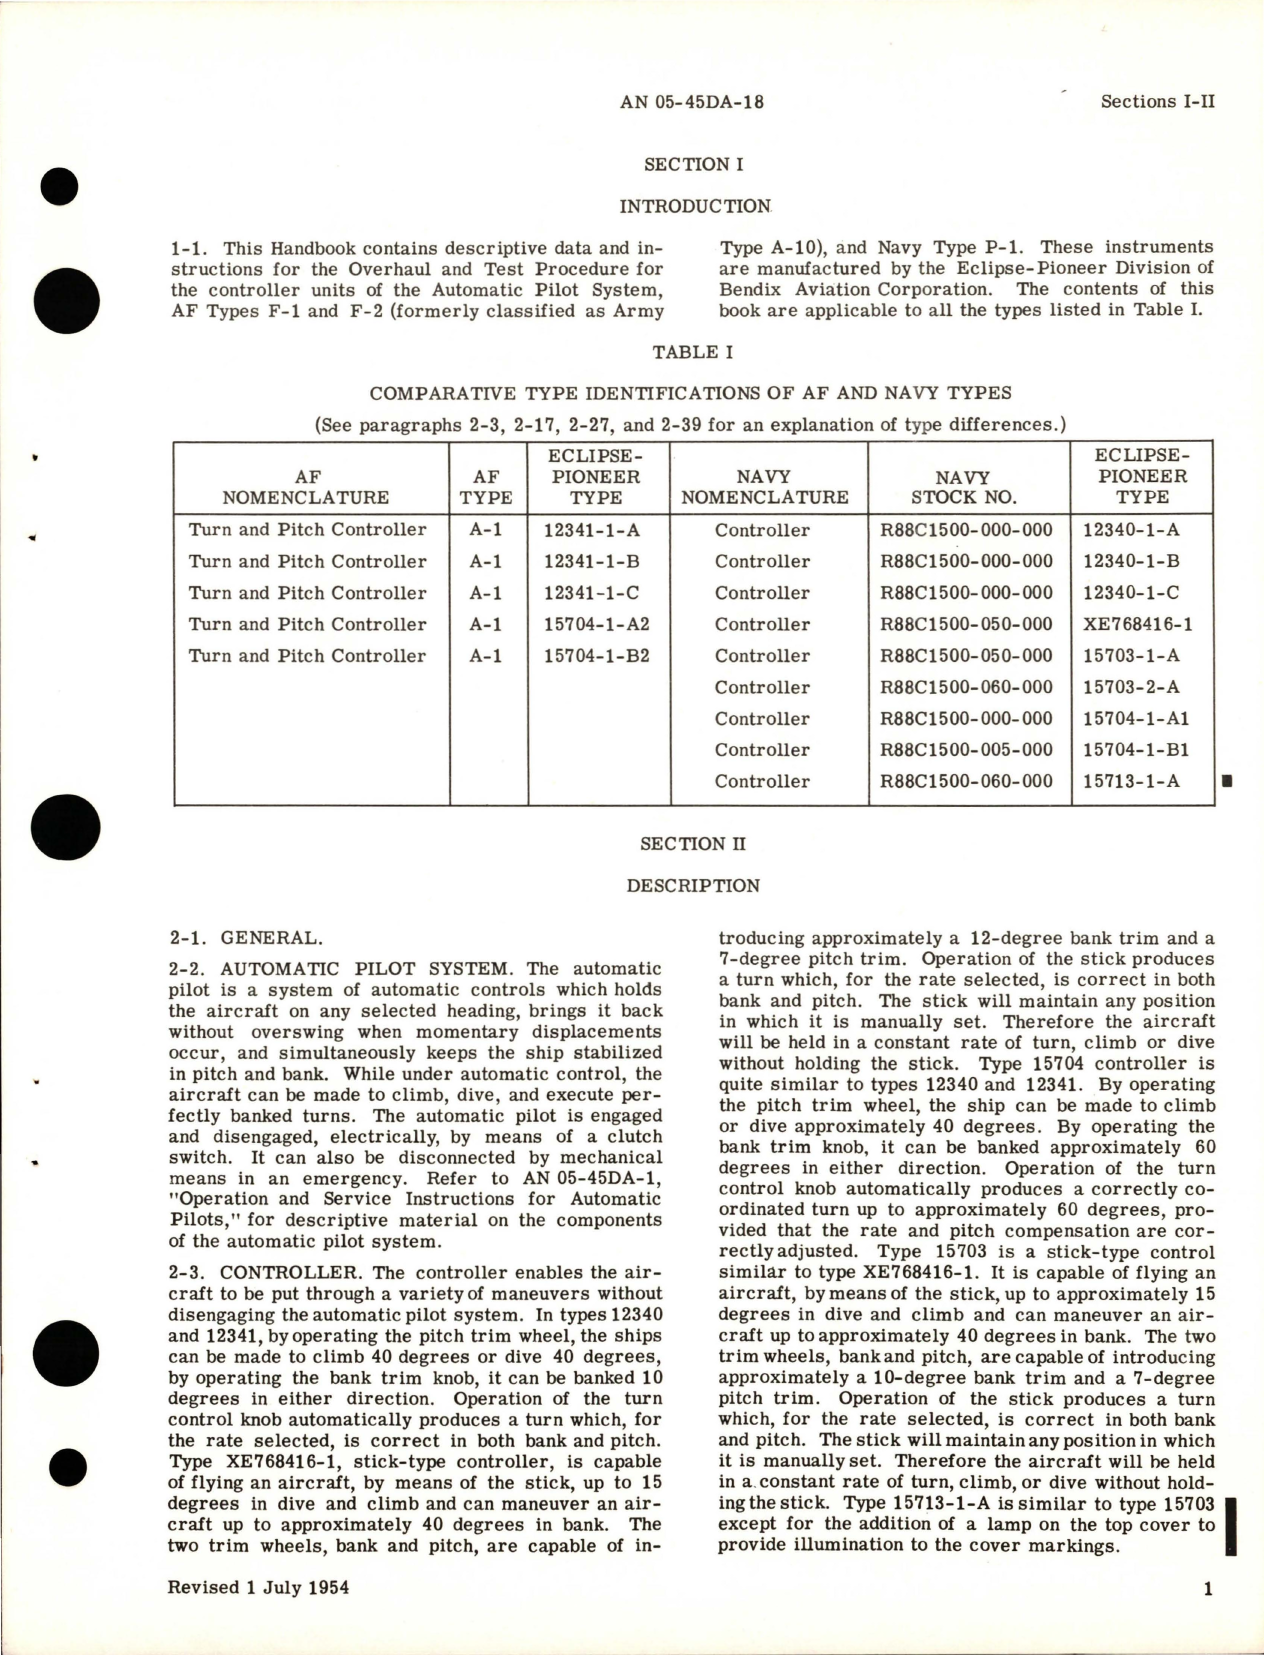 Sample page 7 from AirCorps Library document: Overhaul Instructions for Turn and Pitch Controller 